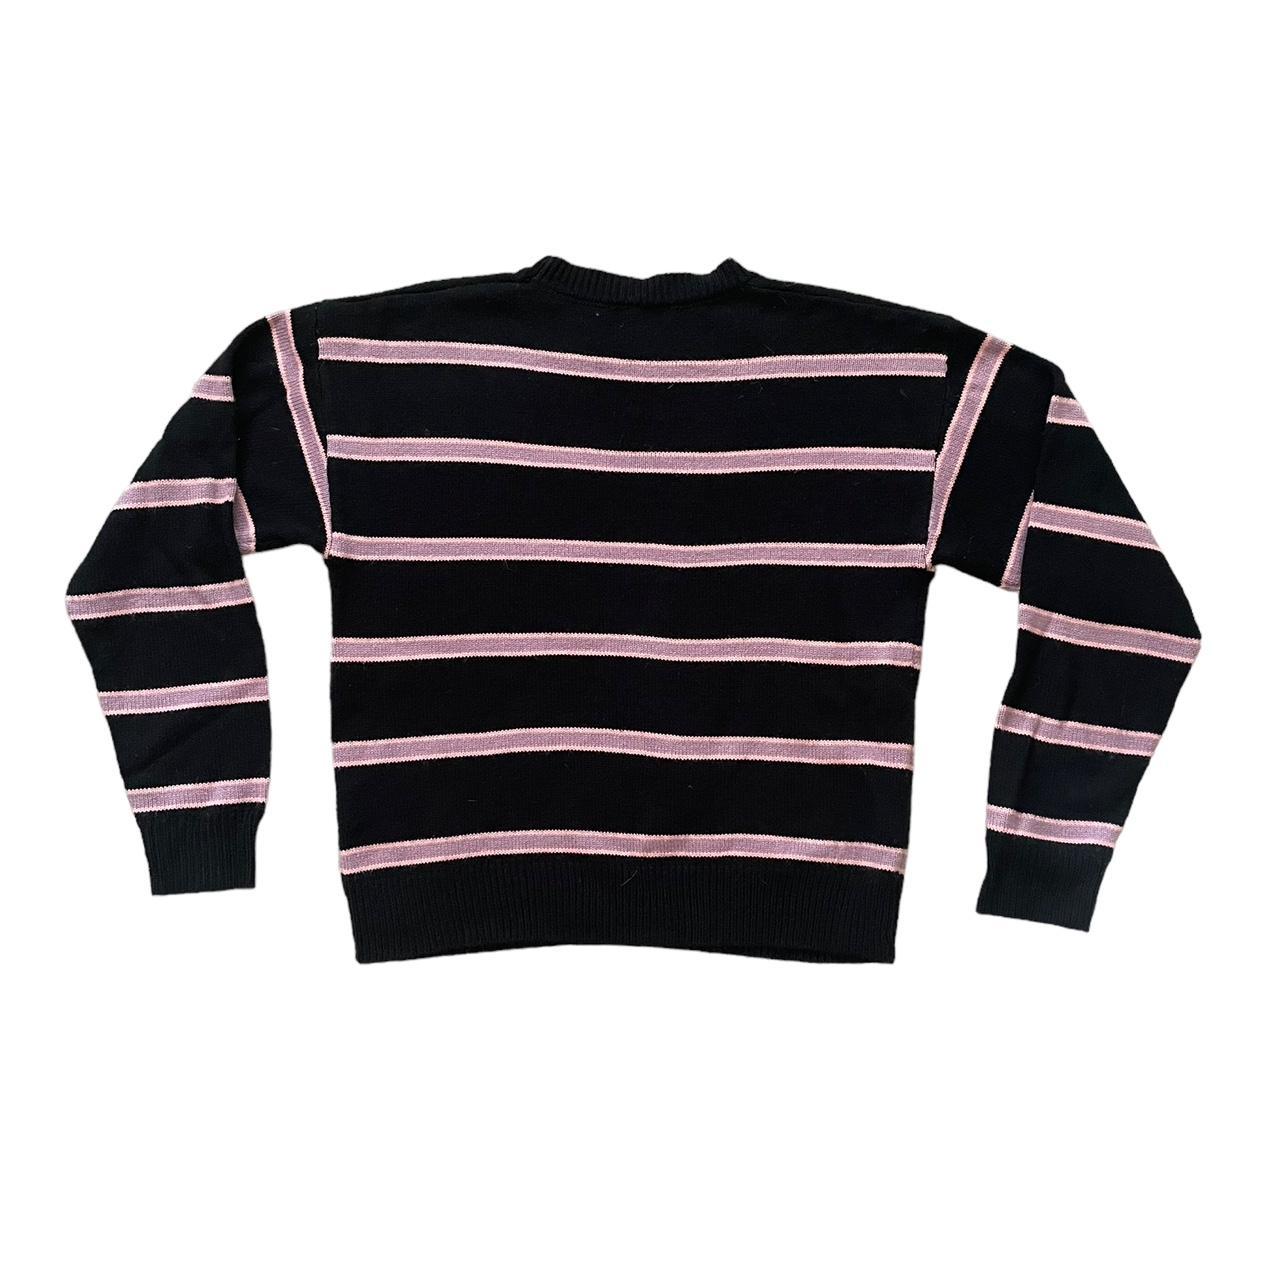 Black White Striped Long Sleeve Pullovers Sweater - Sheinside.com